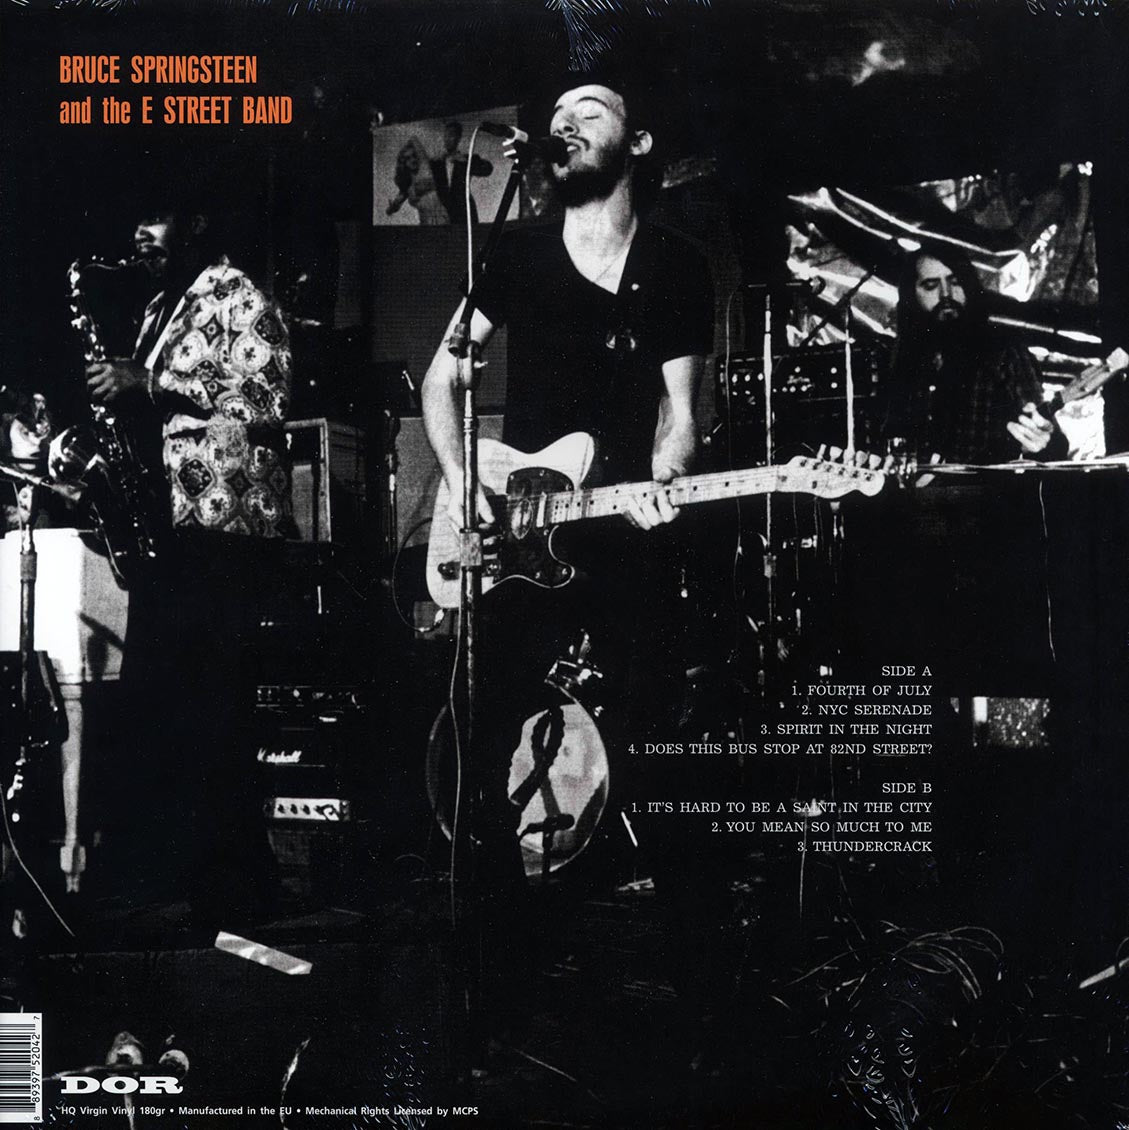 Bruce Springsteen & The E Street Band - Live At My Father's Place In Roslyn, July 31, 1973 (180g) (blue vinyl) - Vinyl LP, LP